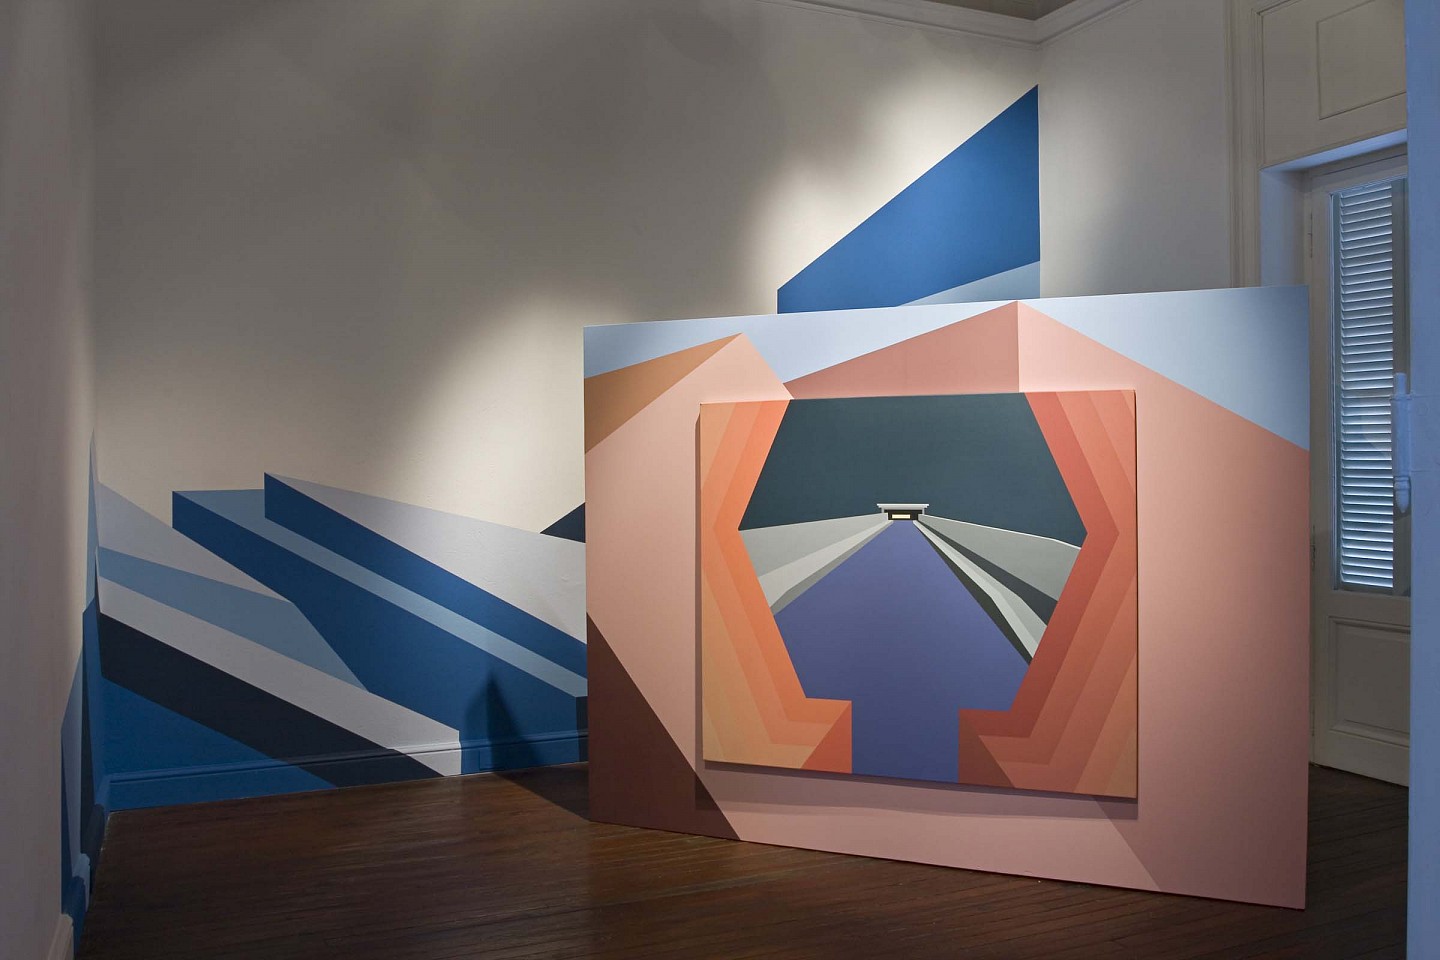 Leila Tschopp
Ideal Models, 2011
Installation; Latex and acrylic painting on wall and canvas; Wood structures., variable dimensions